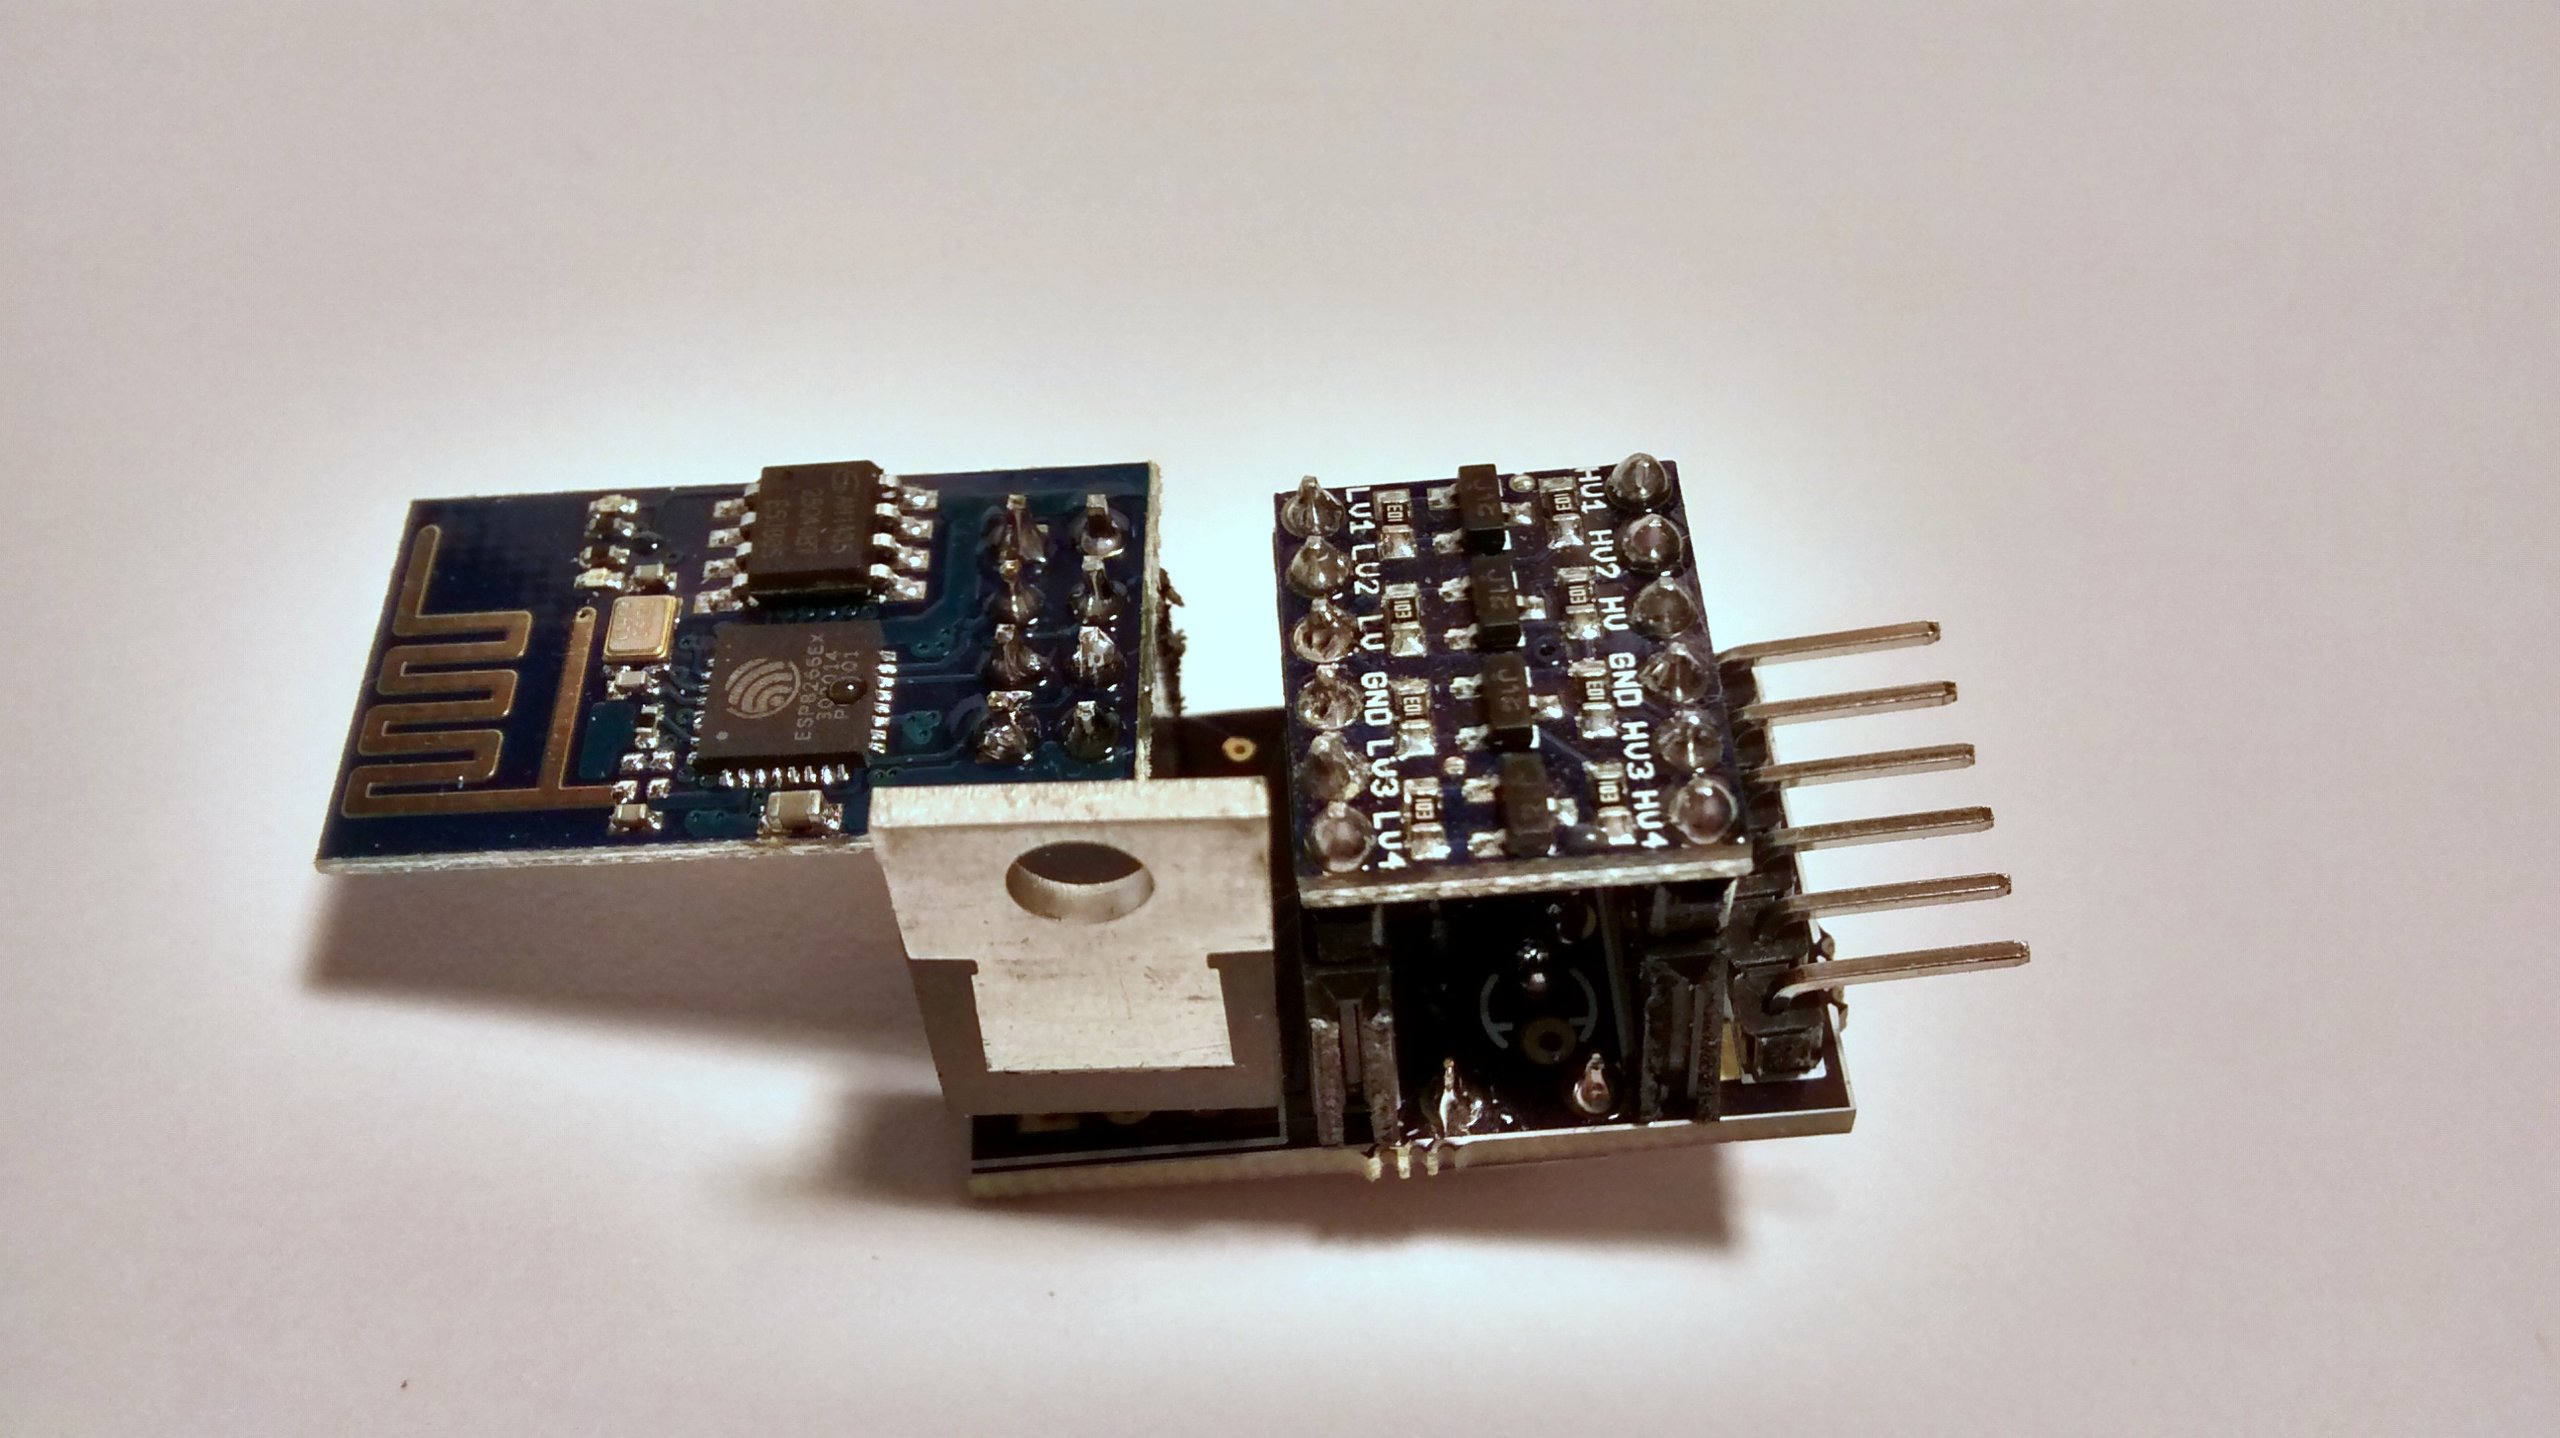 ESP8266 Breakout Board Kit from luro on Tindie